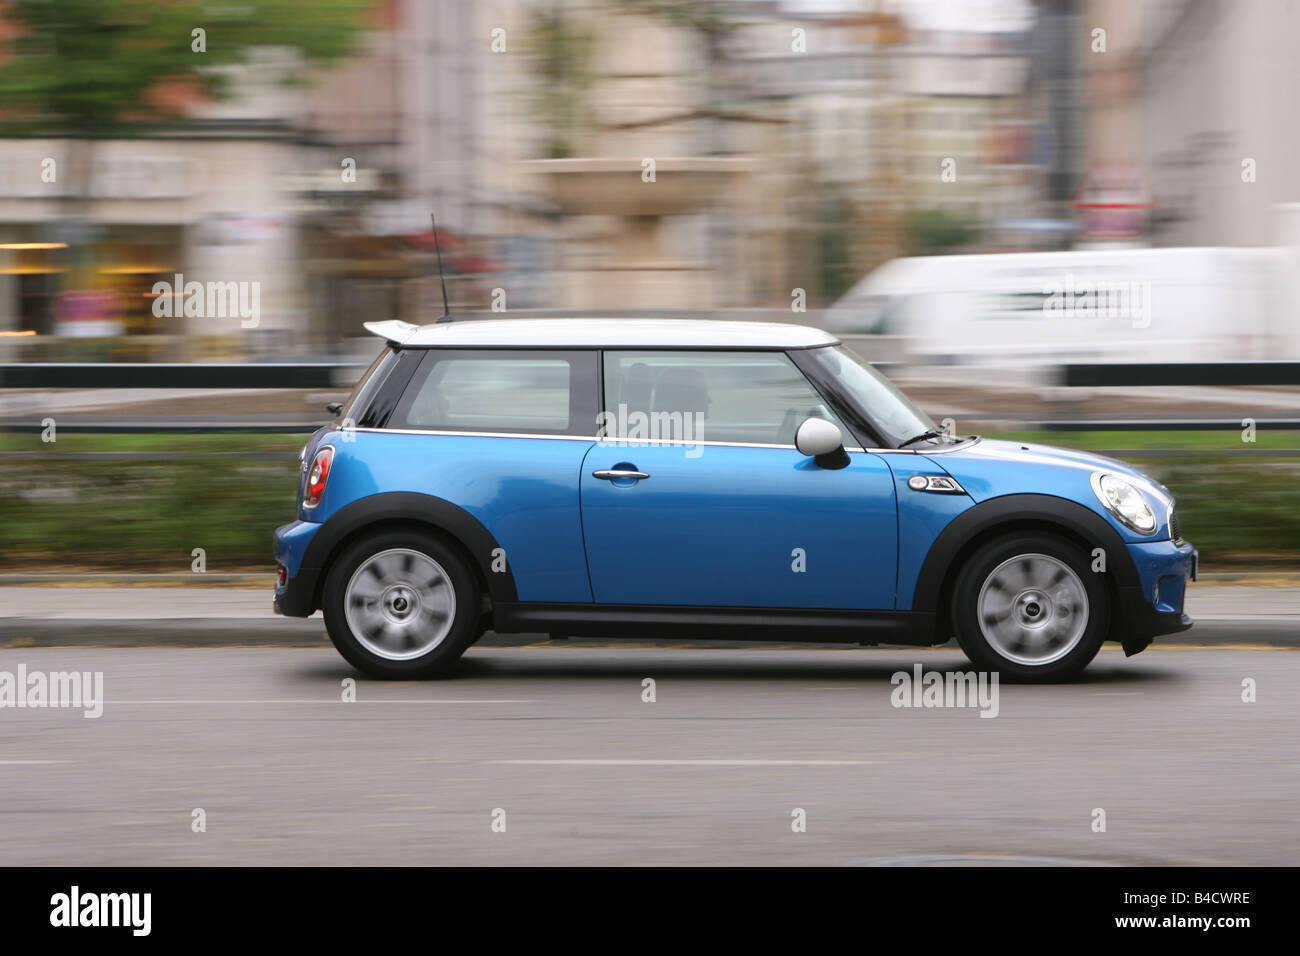 Mini Cooper S, model year 2006-, blue moving, side view, City Stock Photo